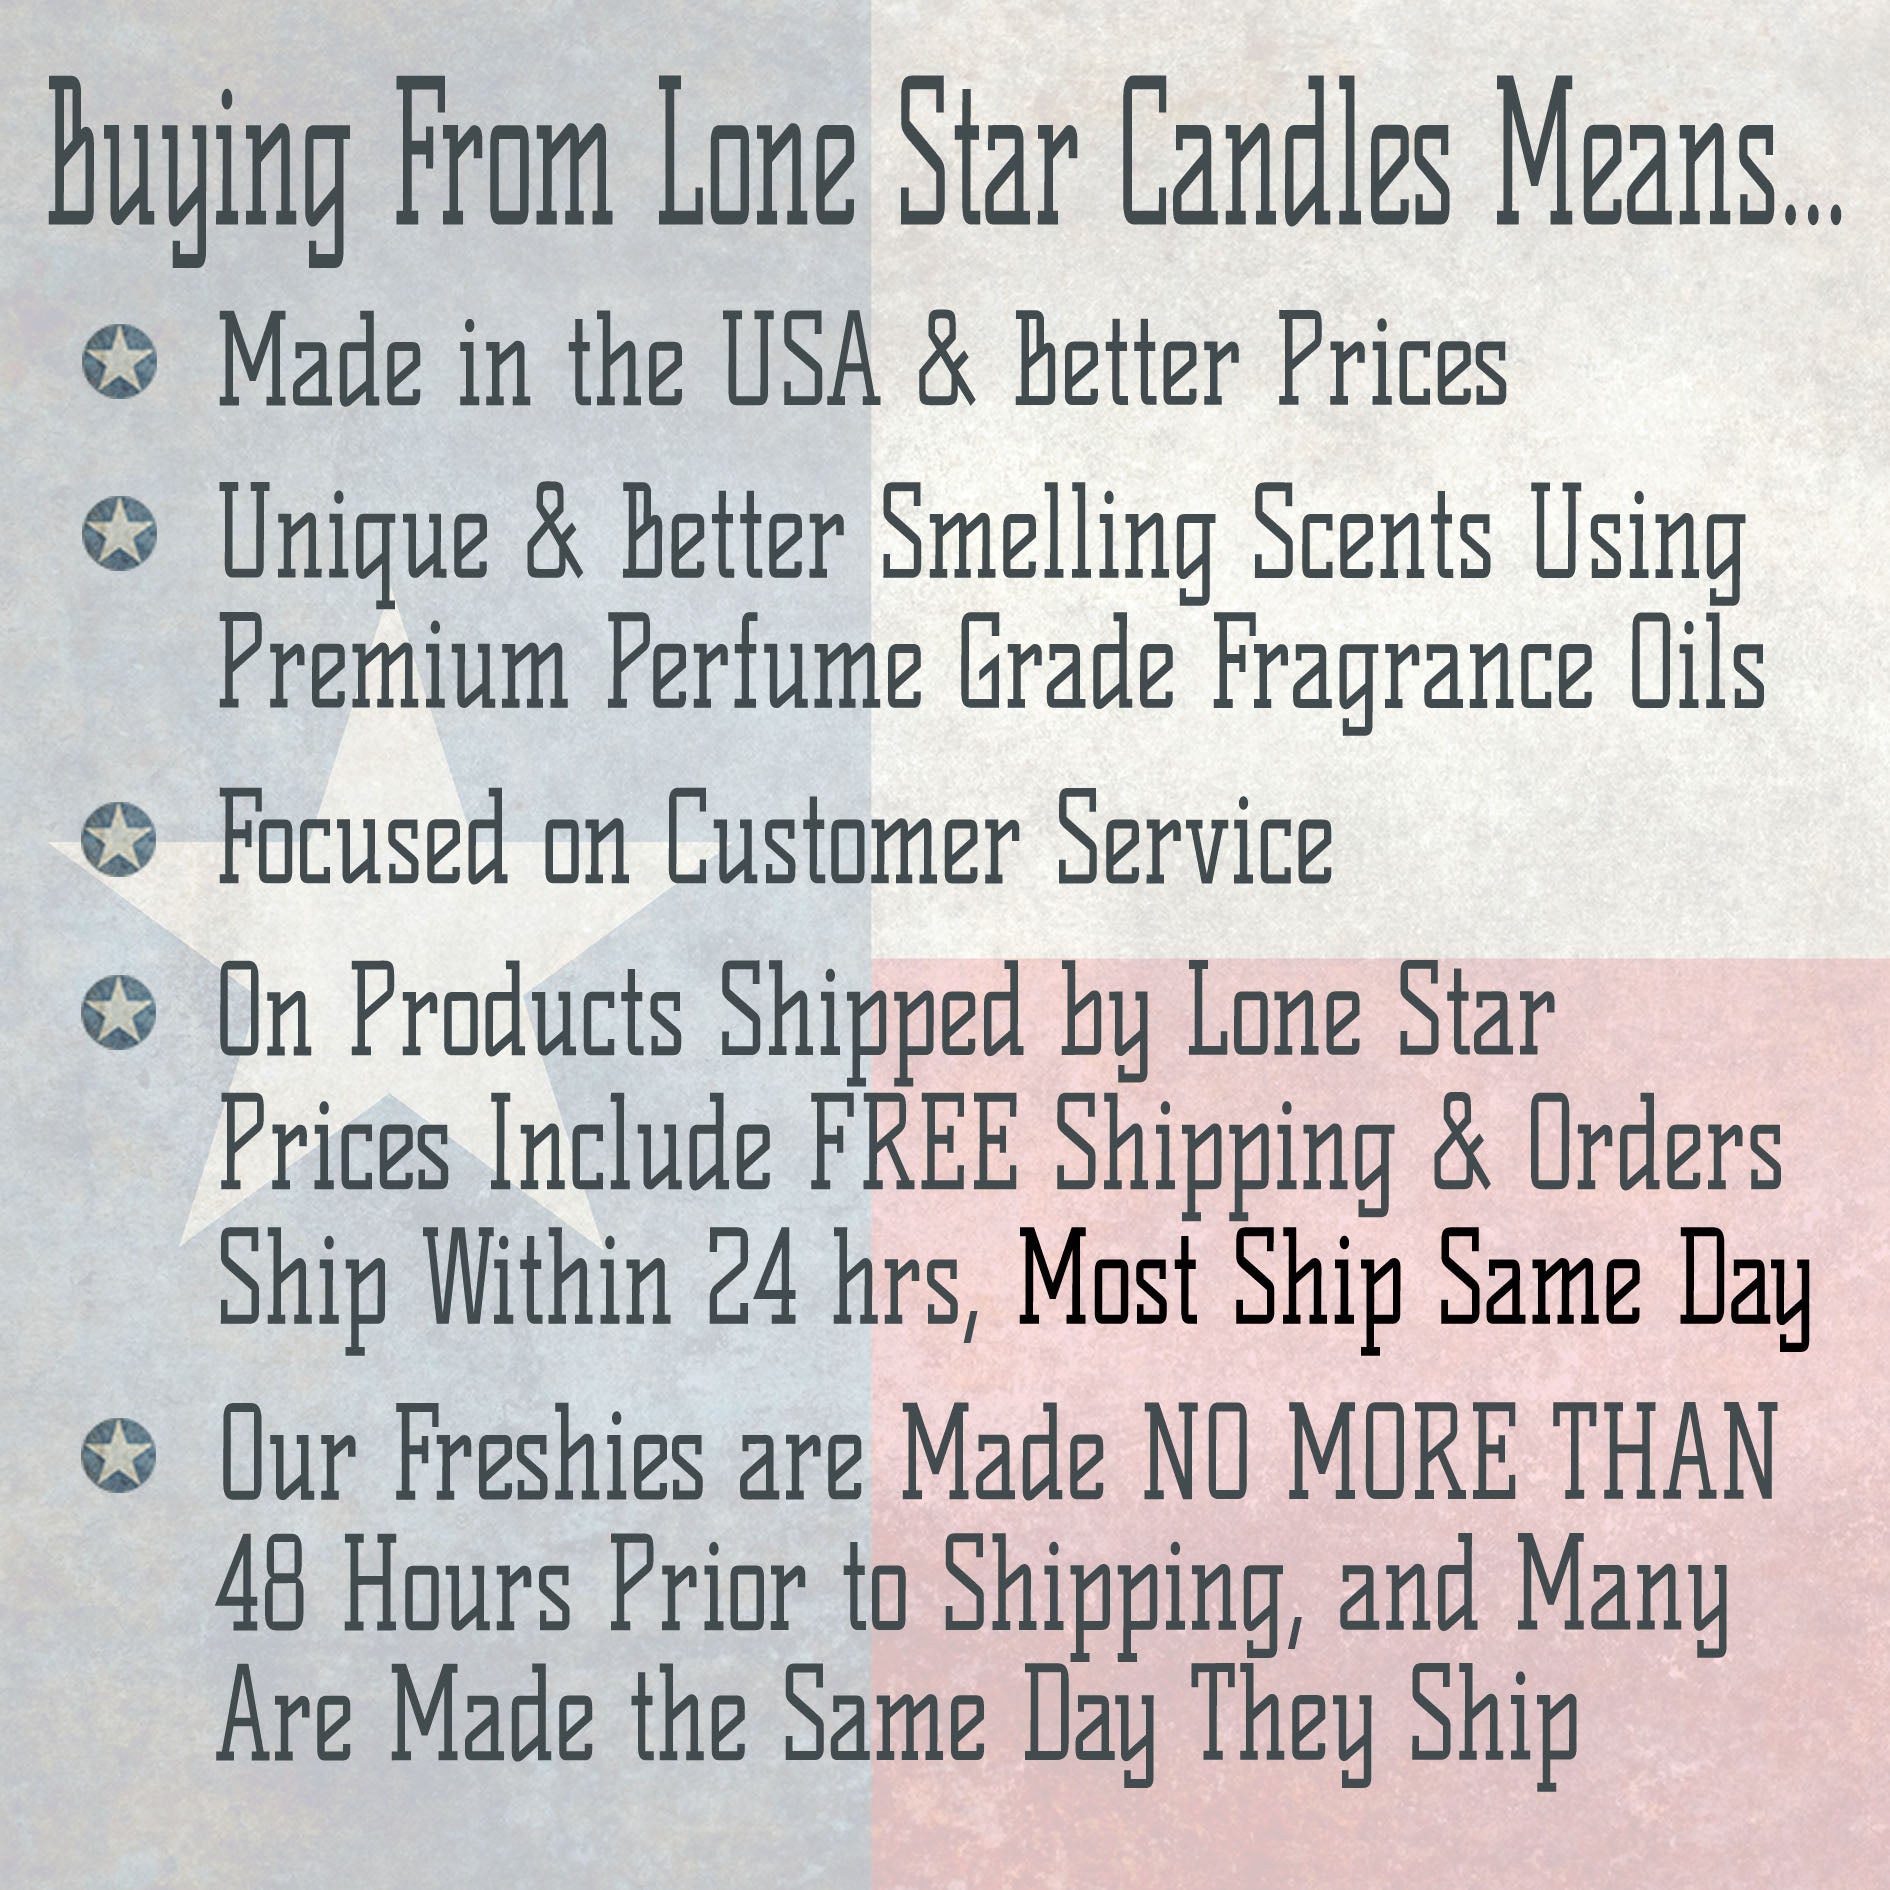 Red Hot Cinnamon, Lone Star Candles & More's Premium Strongly Scented Freshies, Red Hot Candy Like in the Theatre, Car & Air Freshener, USA Made in Texas, Chili Pepper 1-Pack